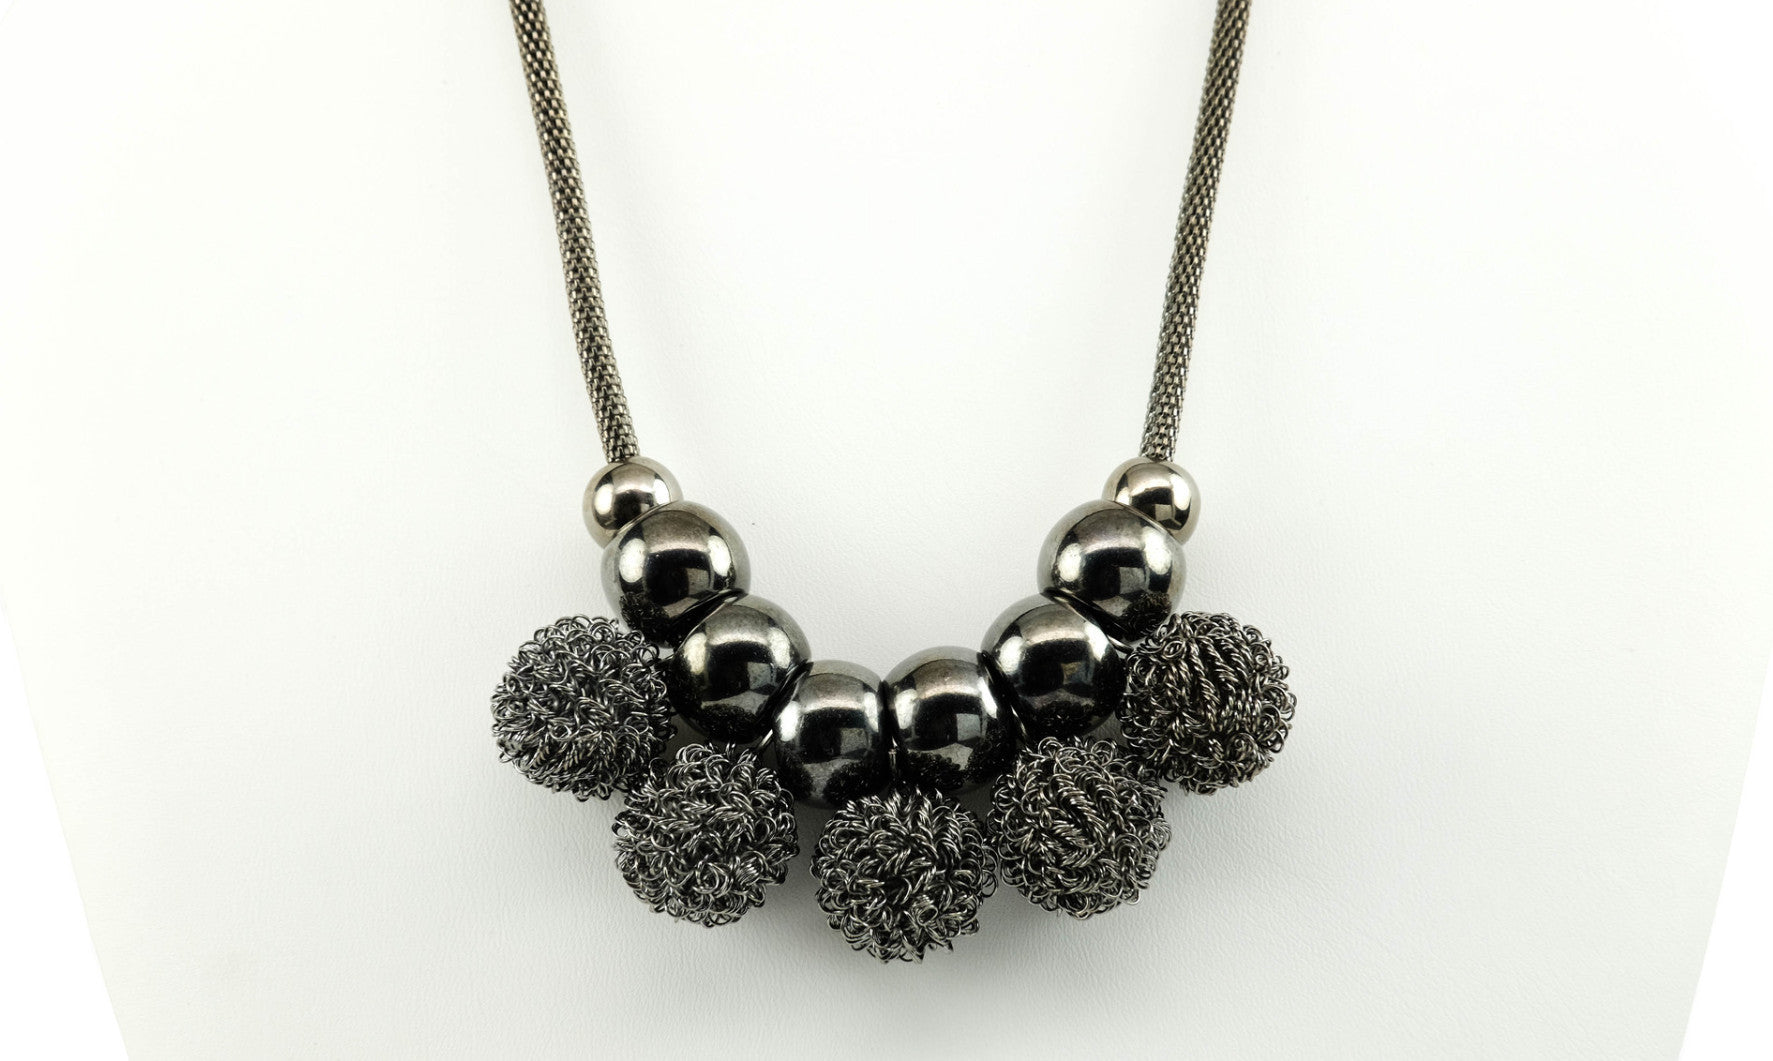 Metal Balls with Pearls Pendant